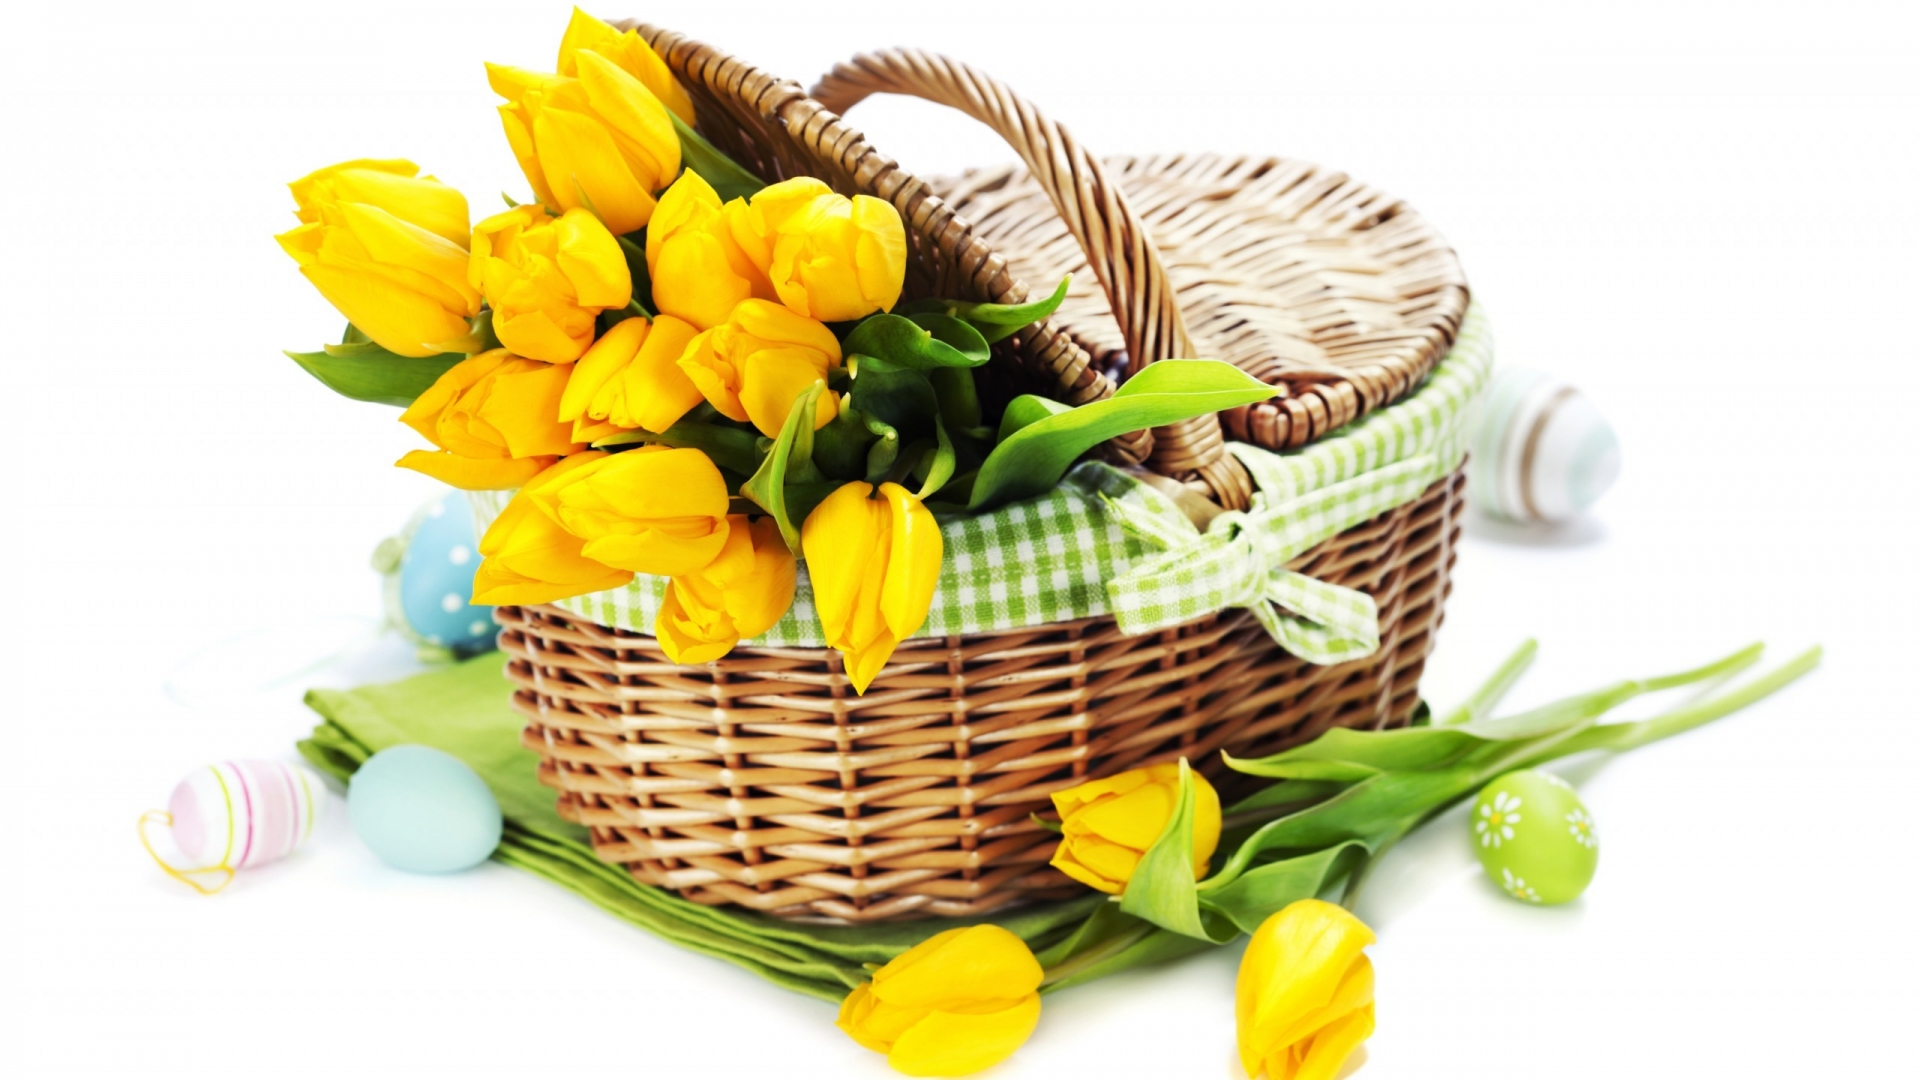 Yellow Tulips Basket for 1920 x 1080 HDTV 1080p resolution